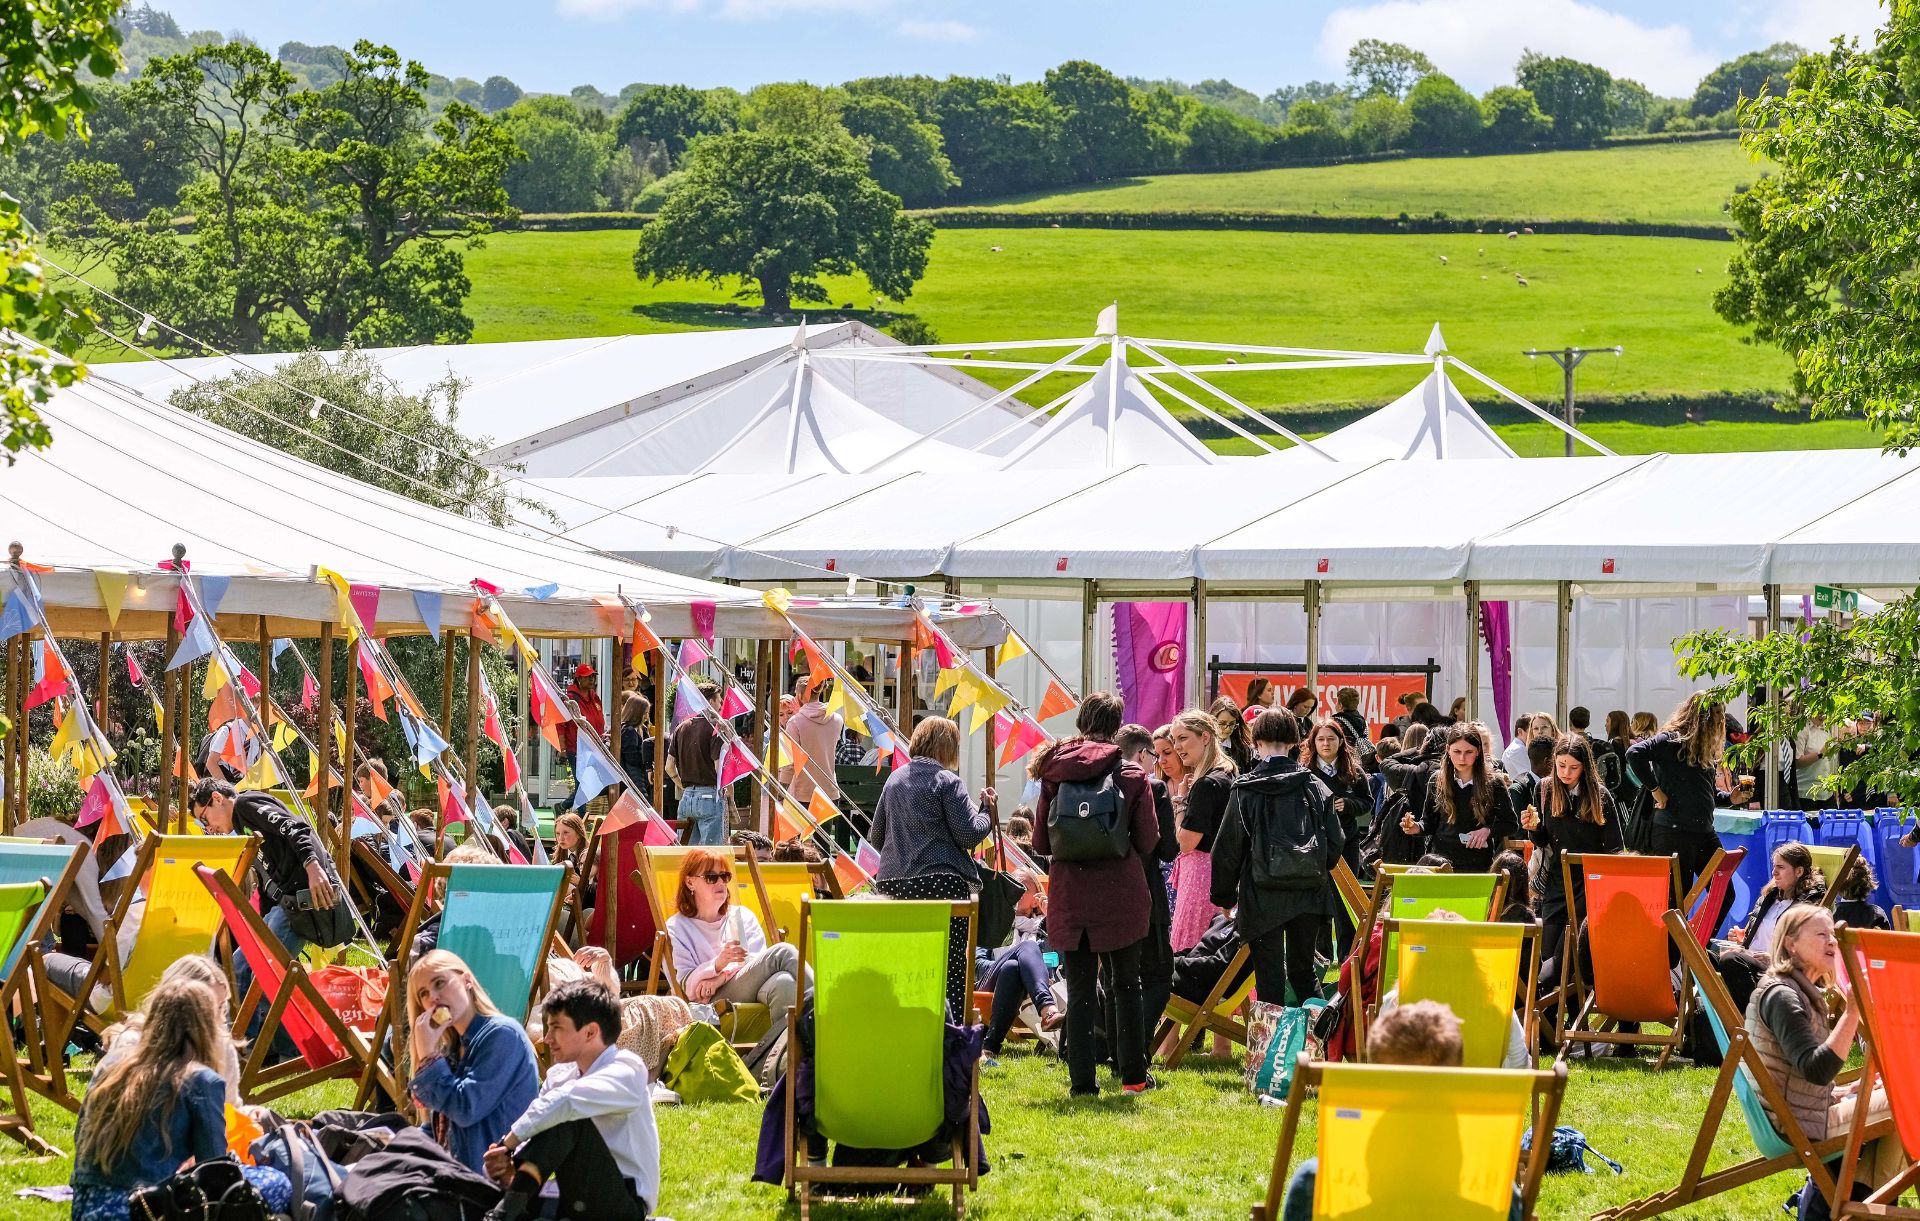 A festival scene, with marquees, bunting and people on deck chairs